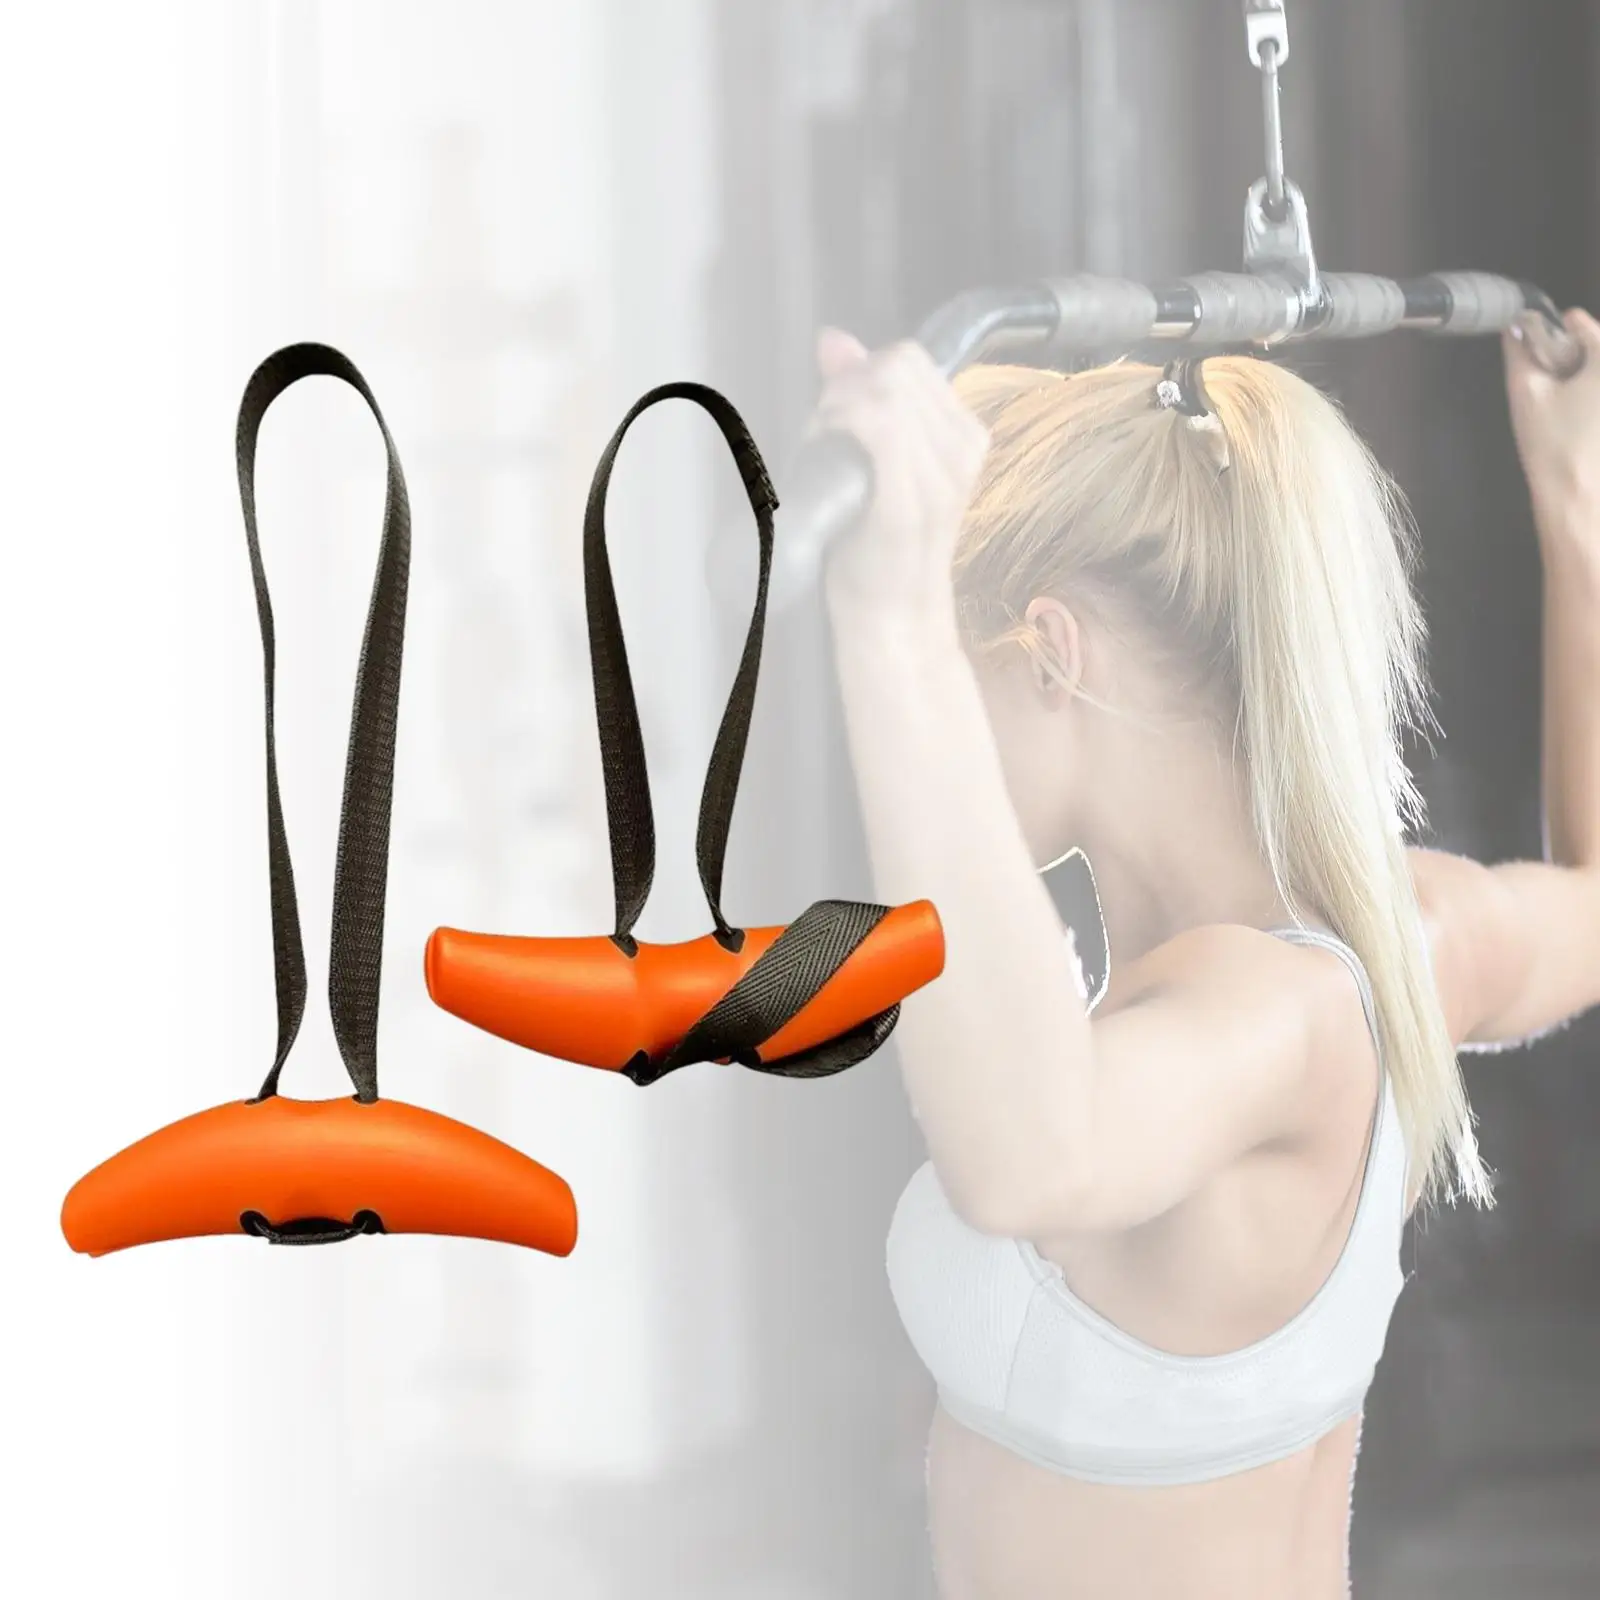 2x Pull up Handles Hand Grips Resistance Band Handles Attachment Nylon for Strength Training Barbell Deadlift Dumbbell Workout